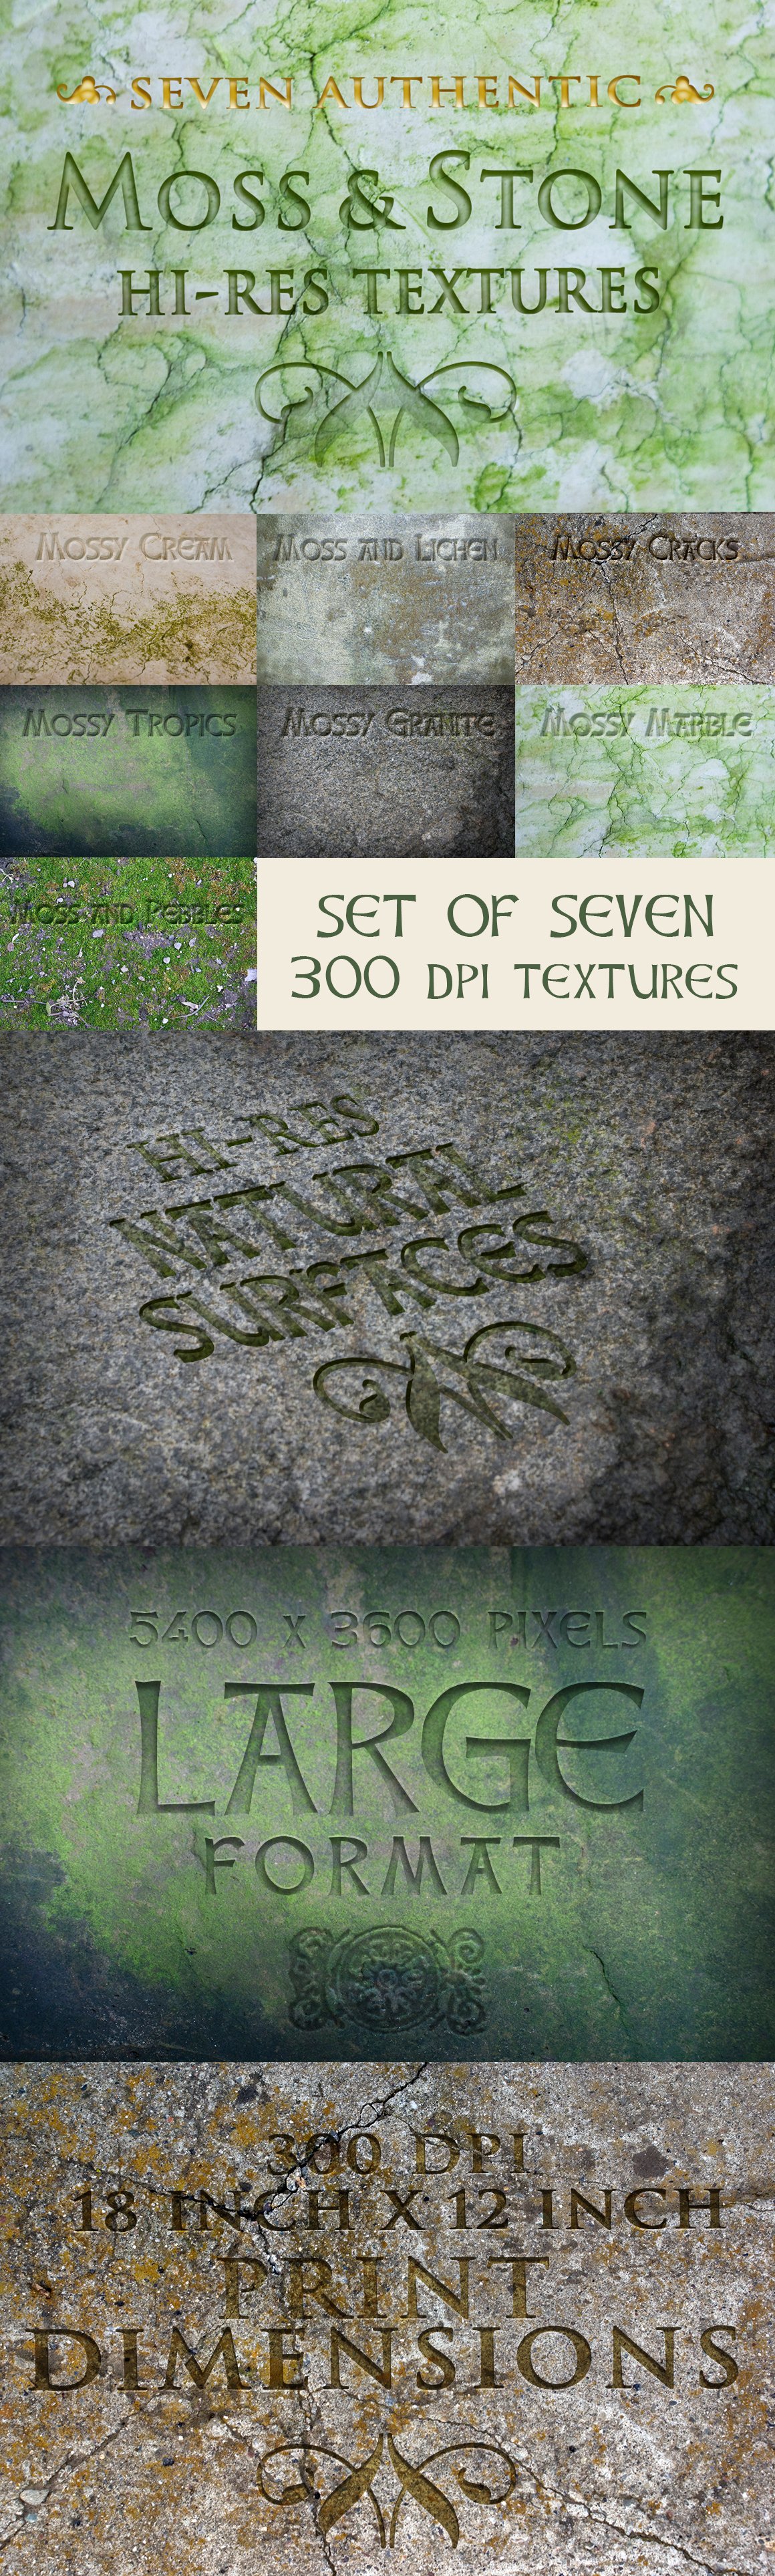 Moss and Stone textures cover image.